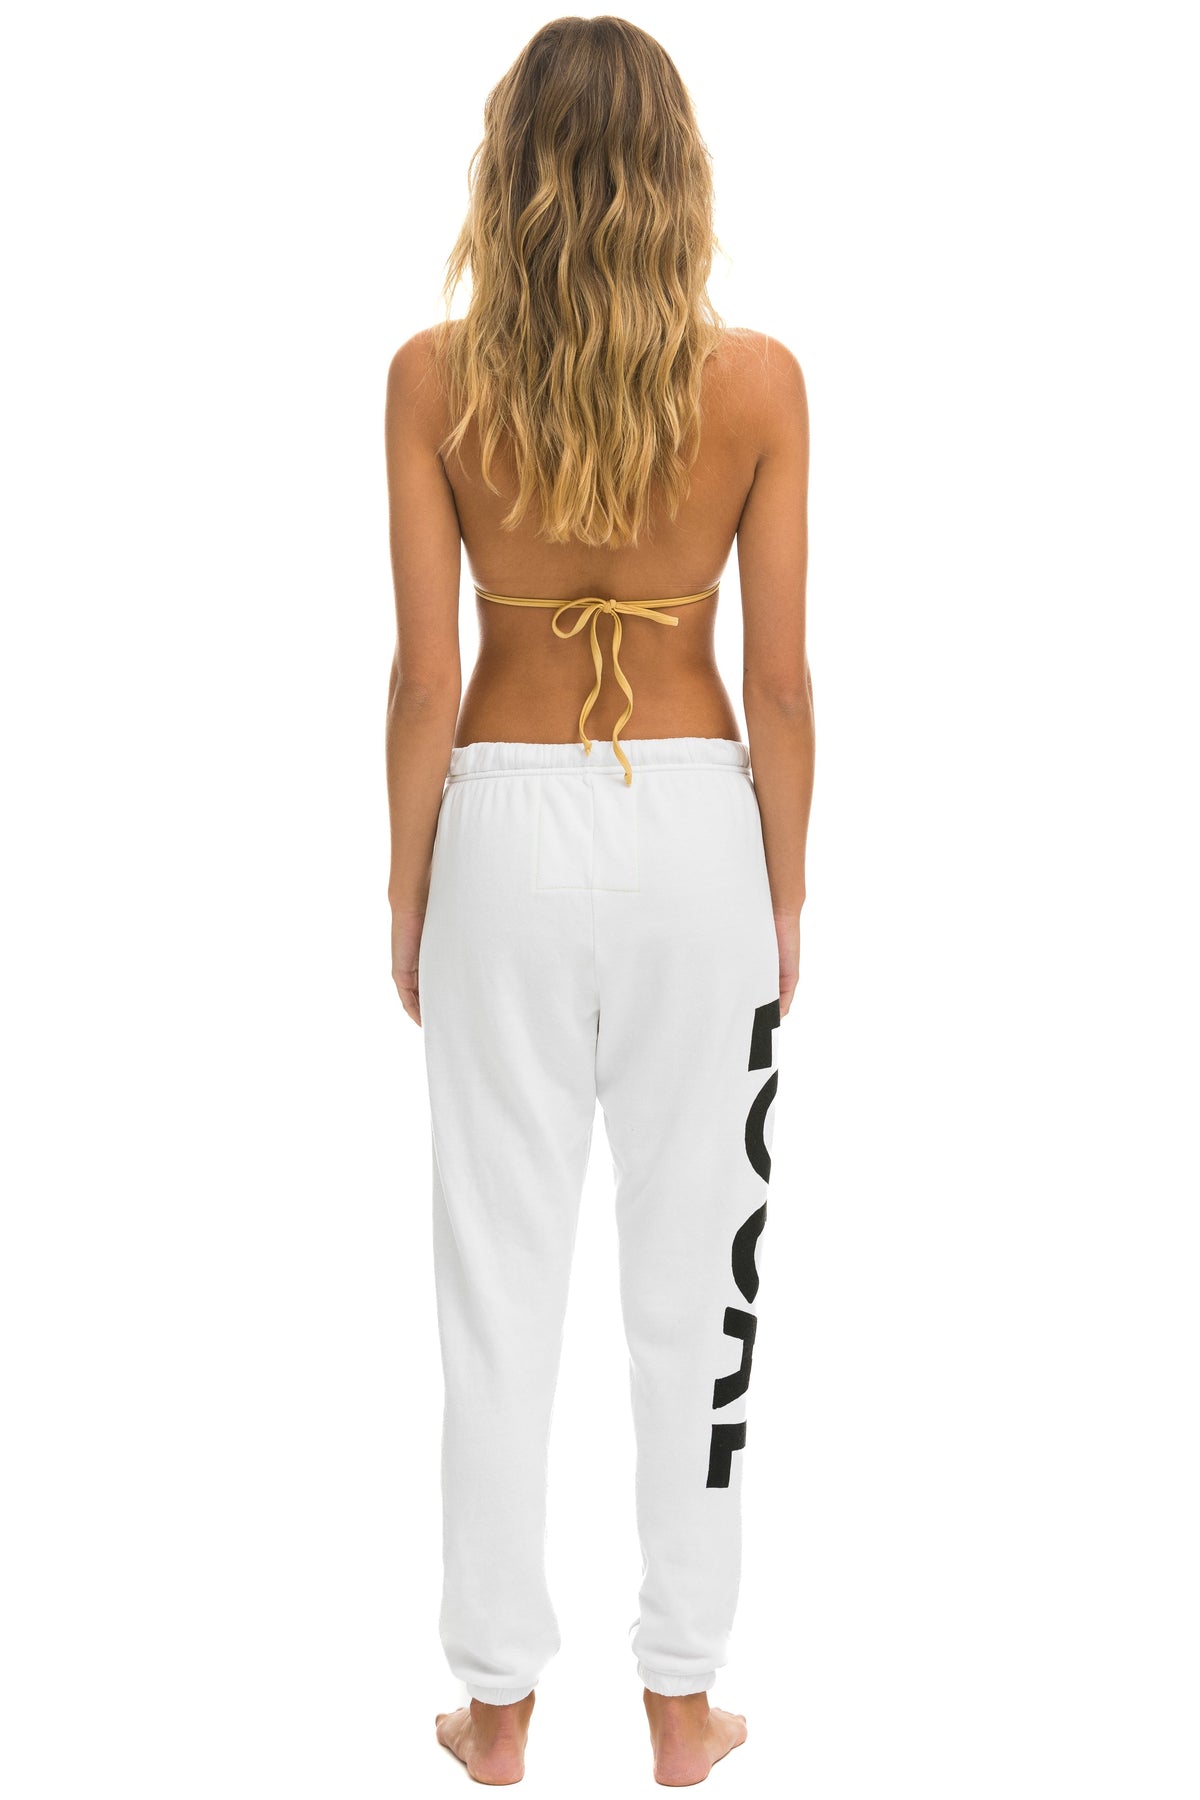 LOCALS ONLY SWEATPANTS - WHITE Women&#39;s Sweatpants Aviator Nation 